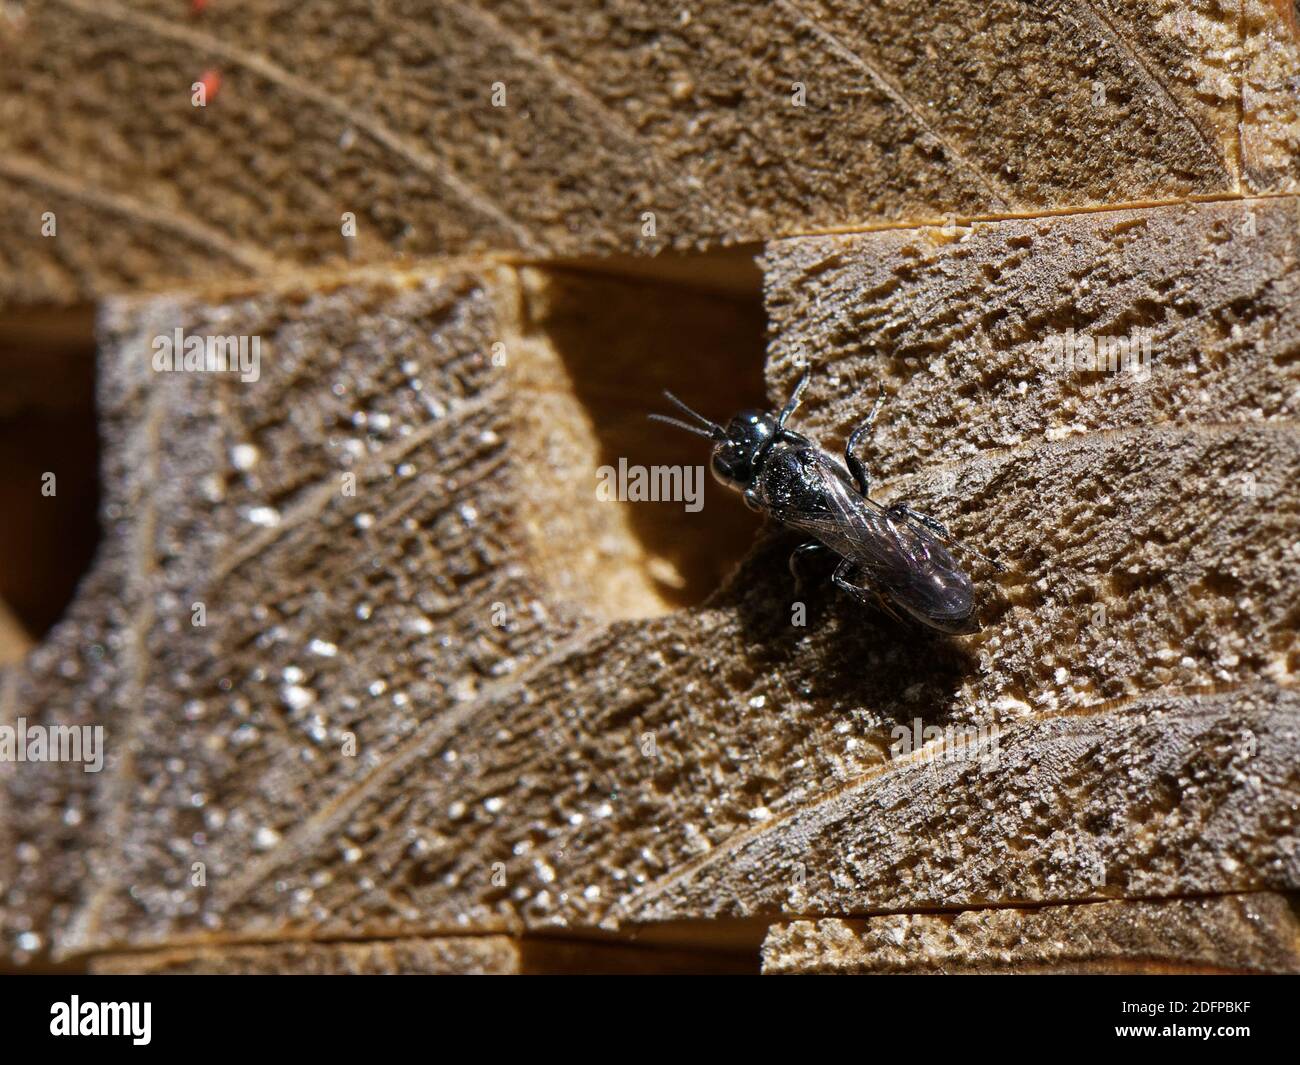 Aphid wasp / Sphecid wasp (Pemphredon sp.) inspecting a potential nest site in an insect hotel, Wiltshire garden, UK, May. Stock Photo